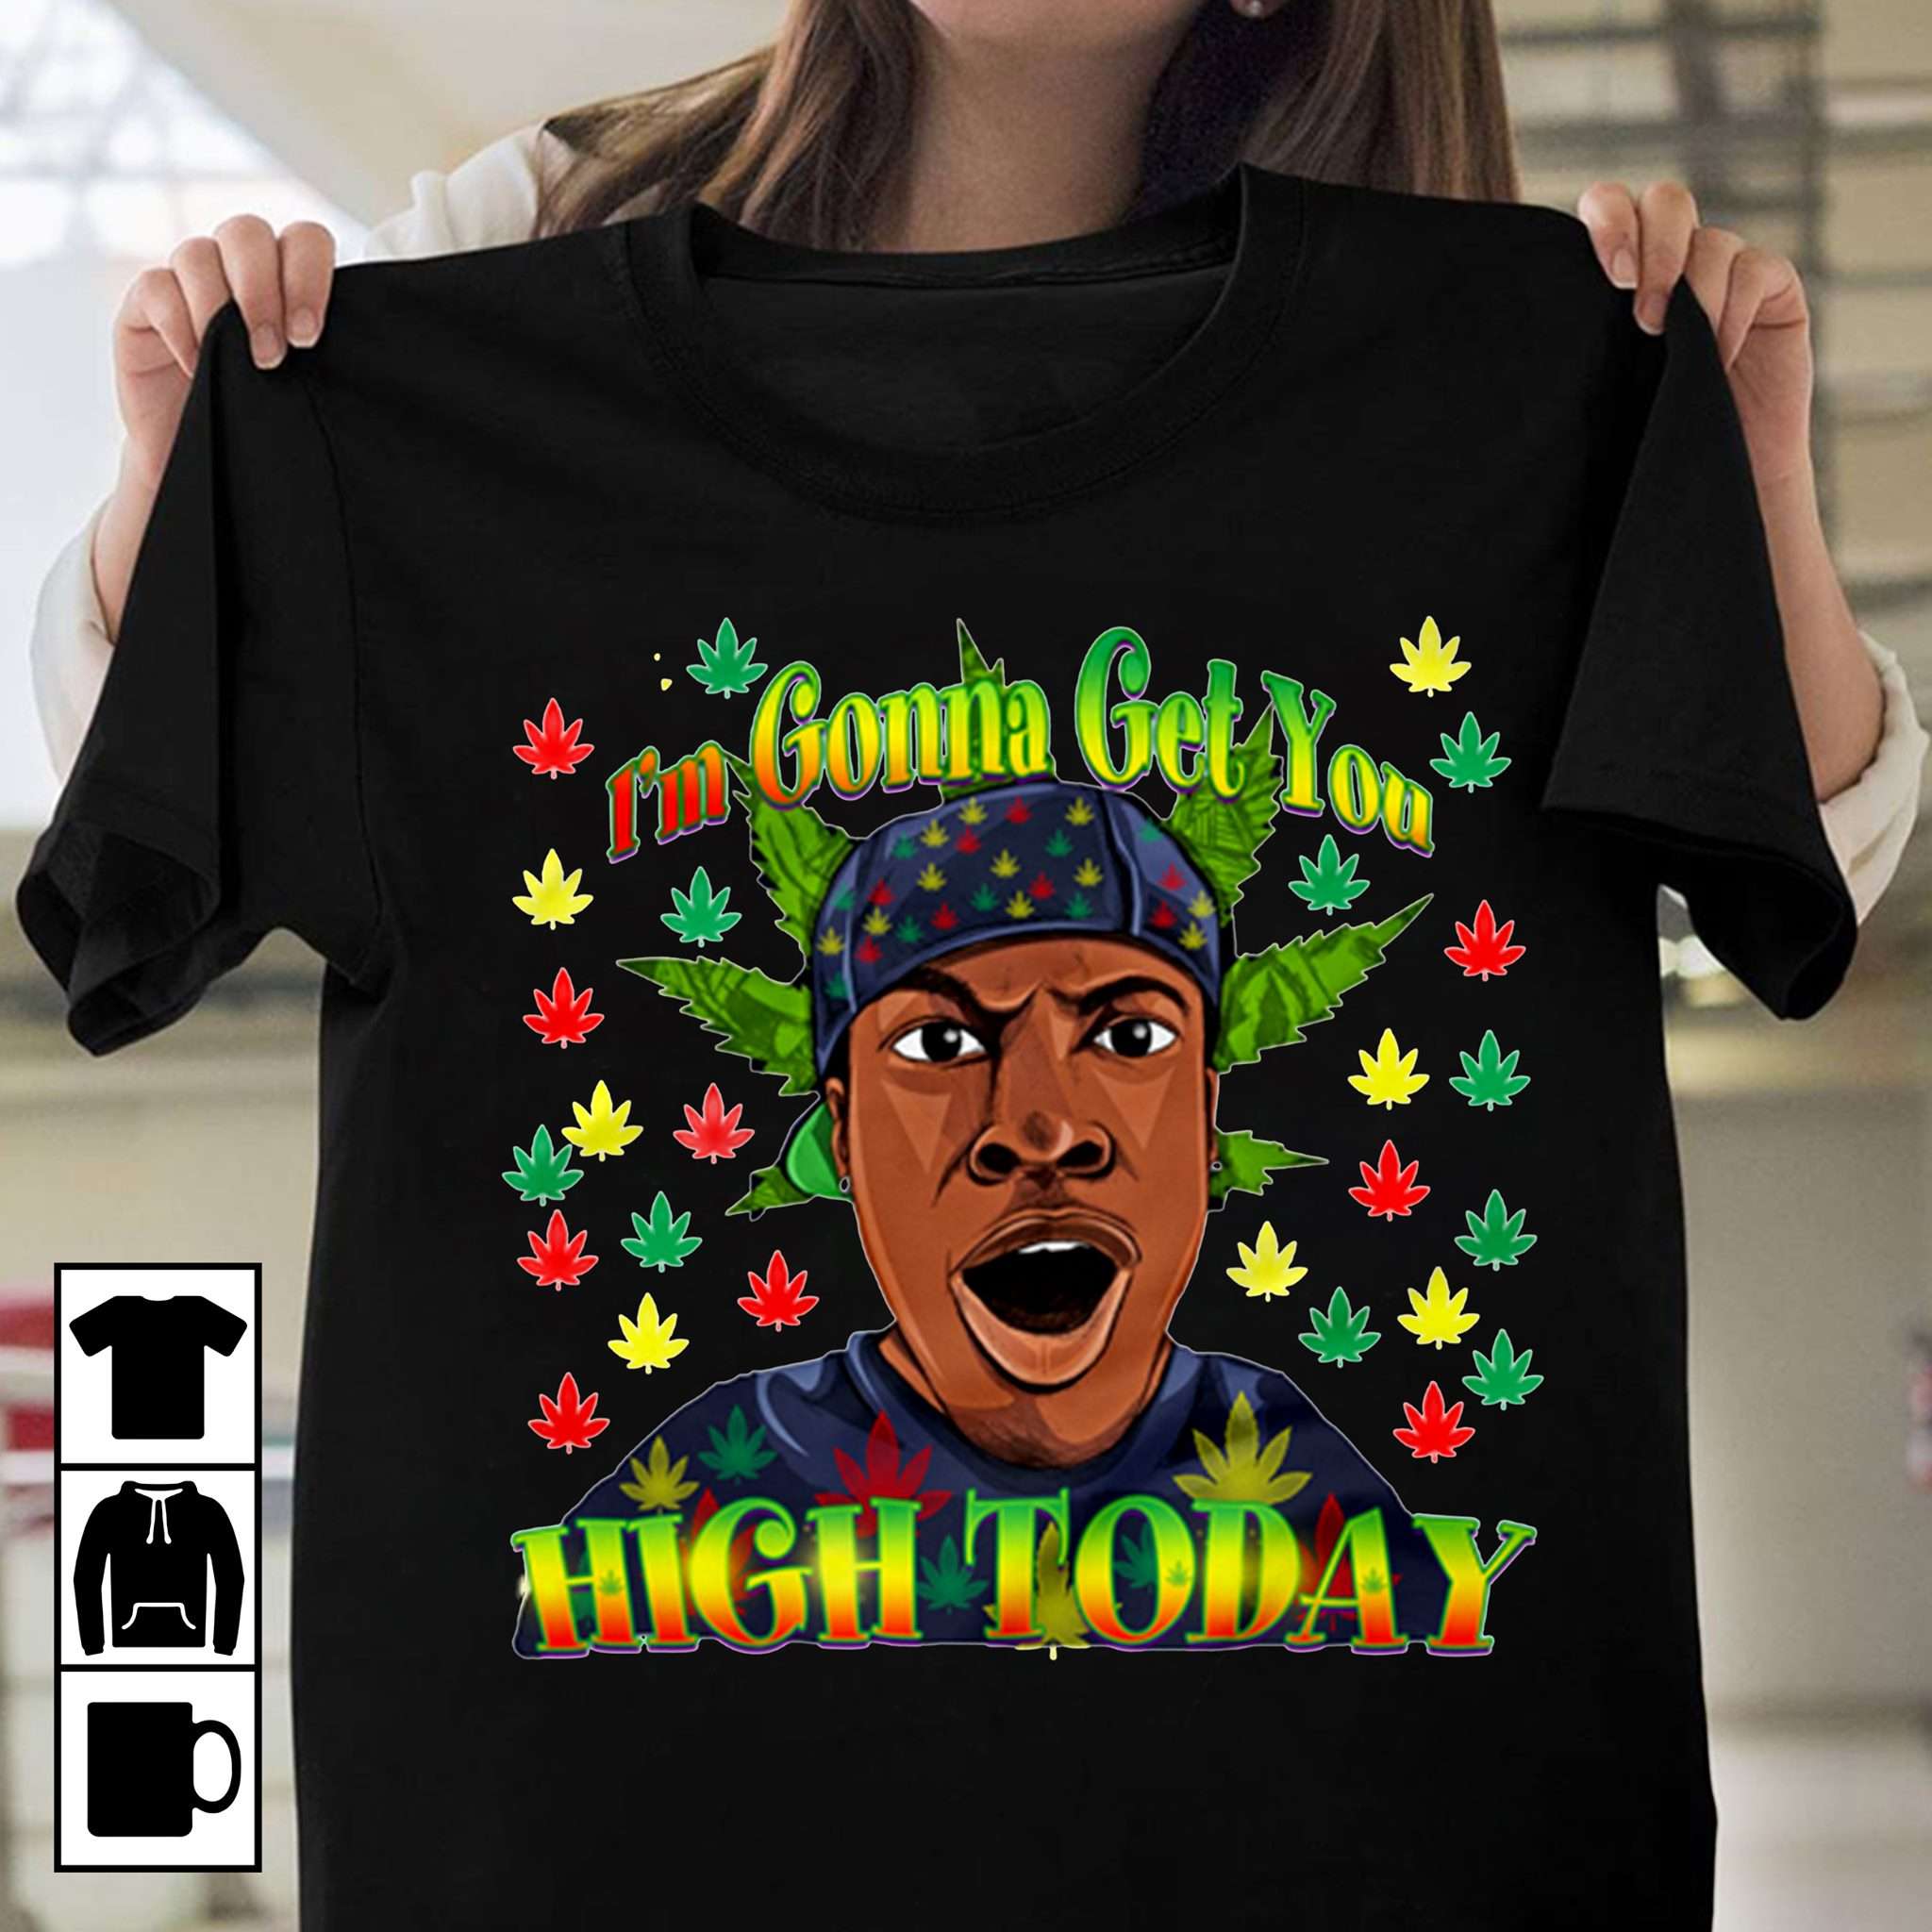 I'm gonna get you high today - Get high black man, love cussing weed